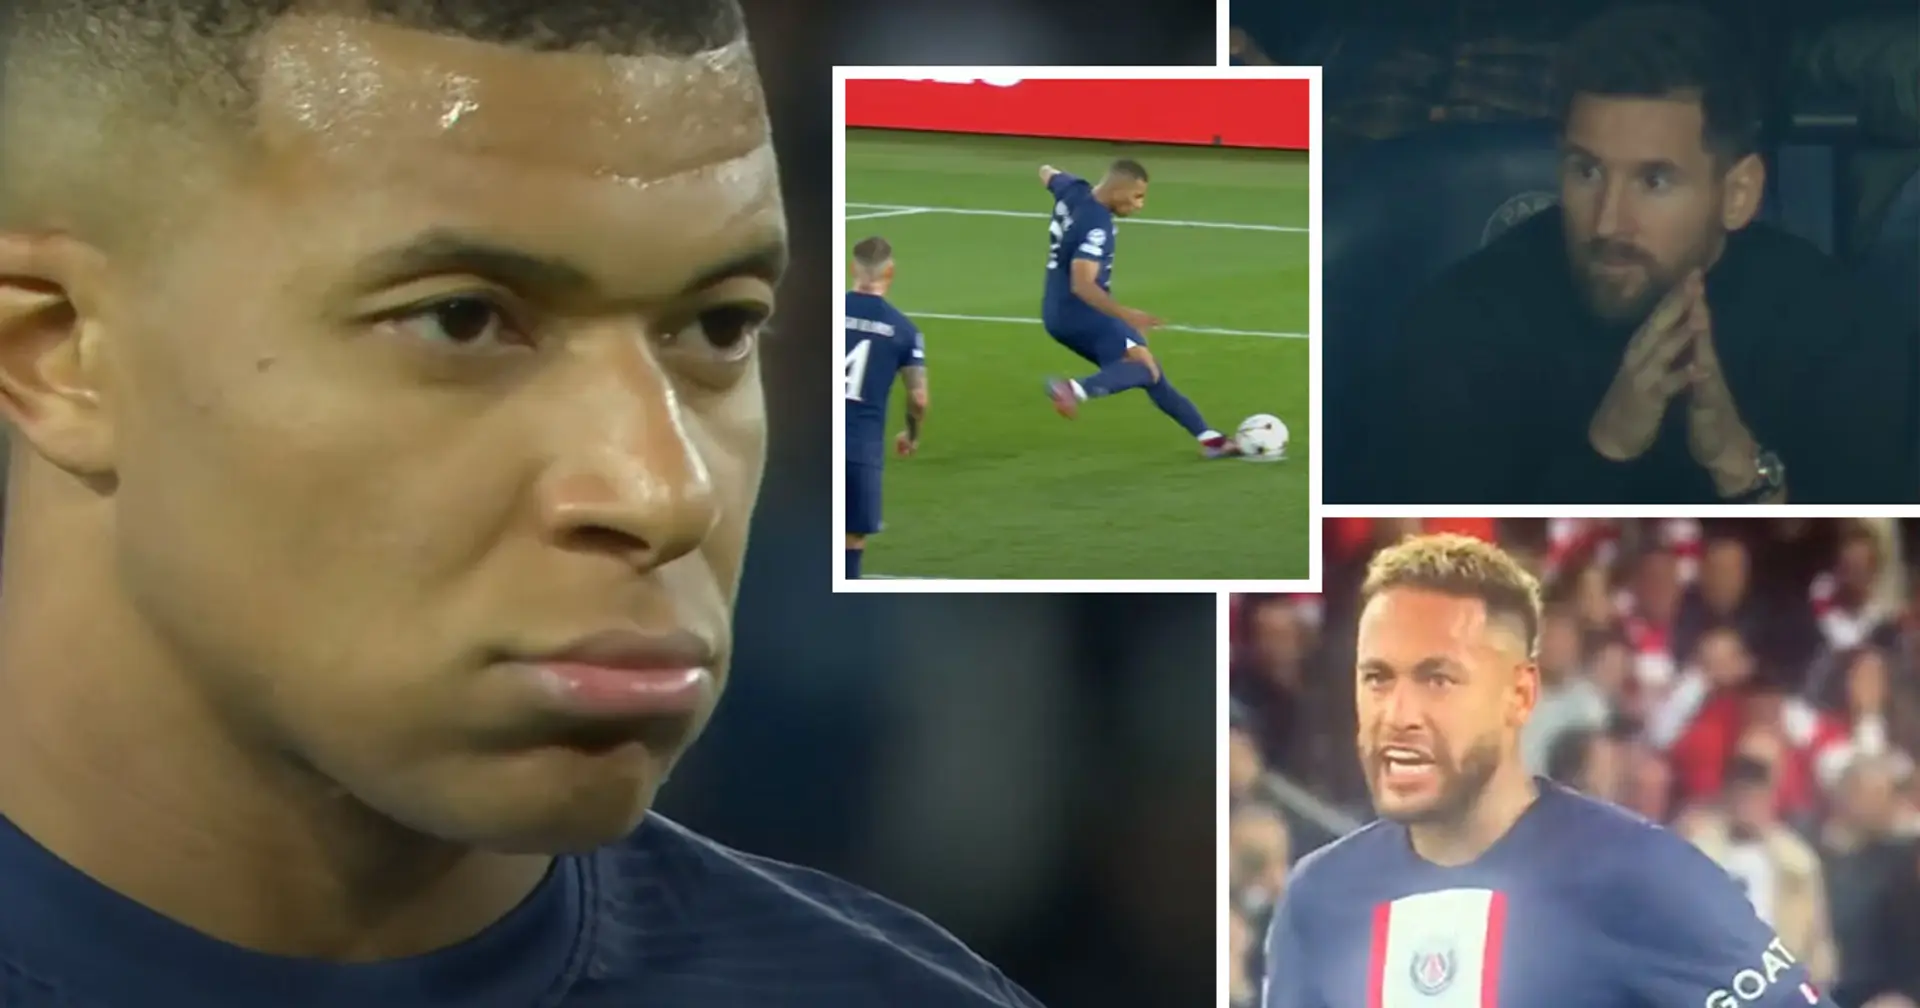 Caught on camera: Neymar and Messi's reactions to Kylian Mbappe scoring a penalty for PSG